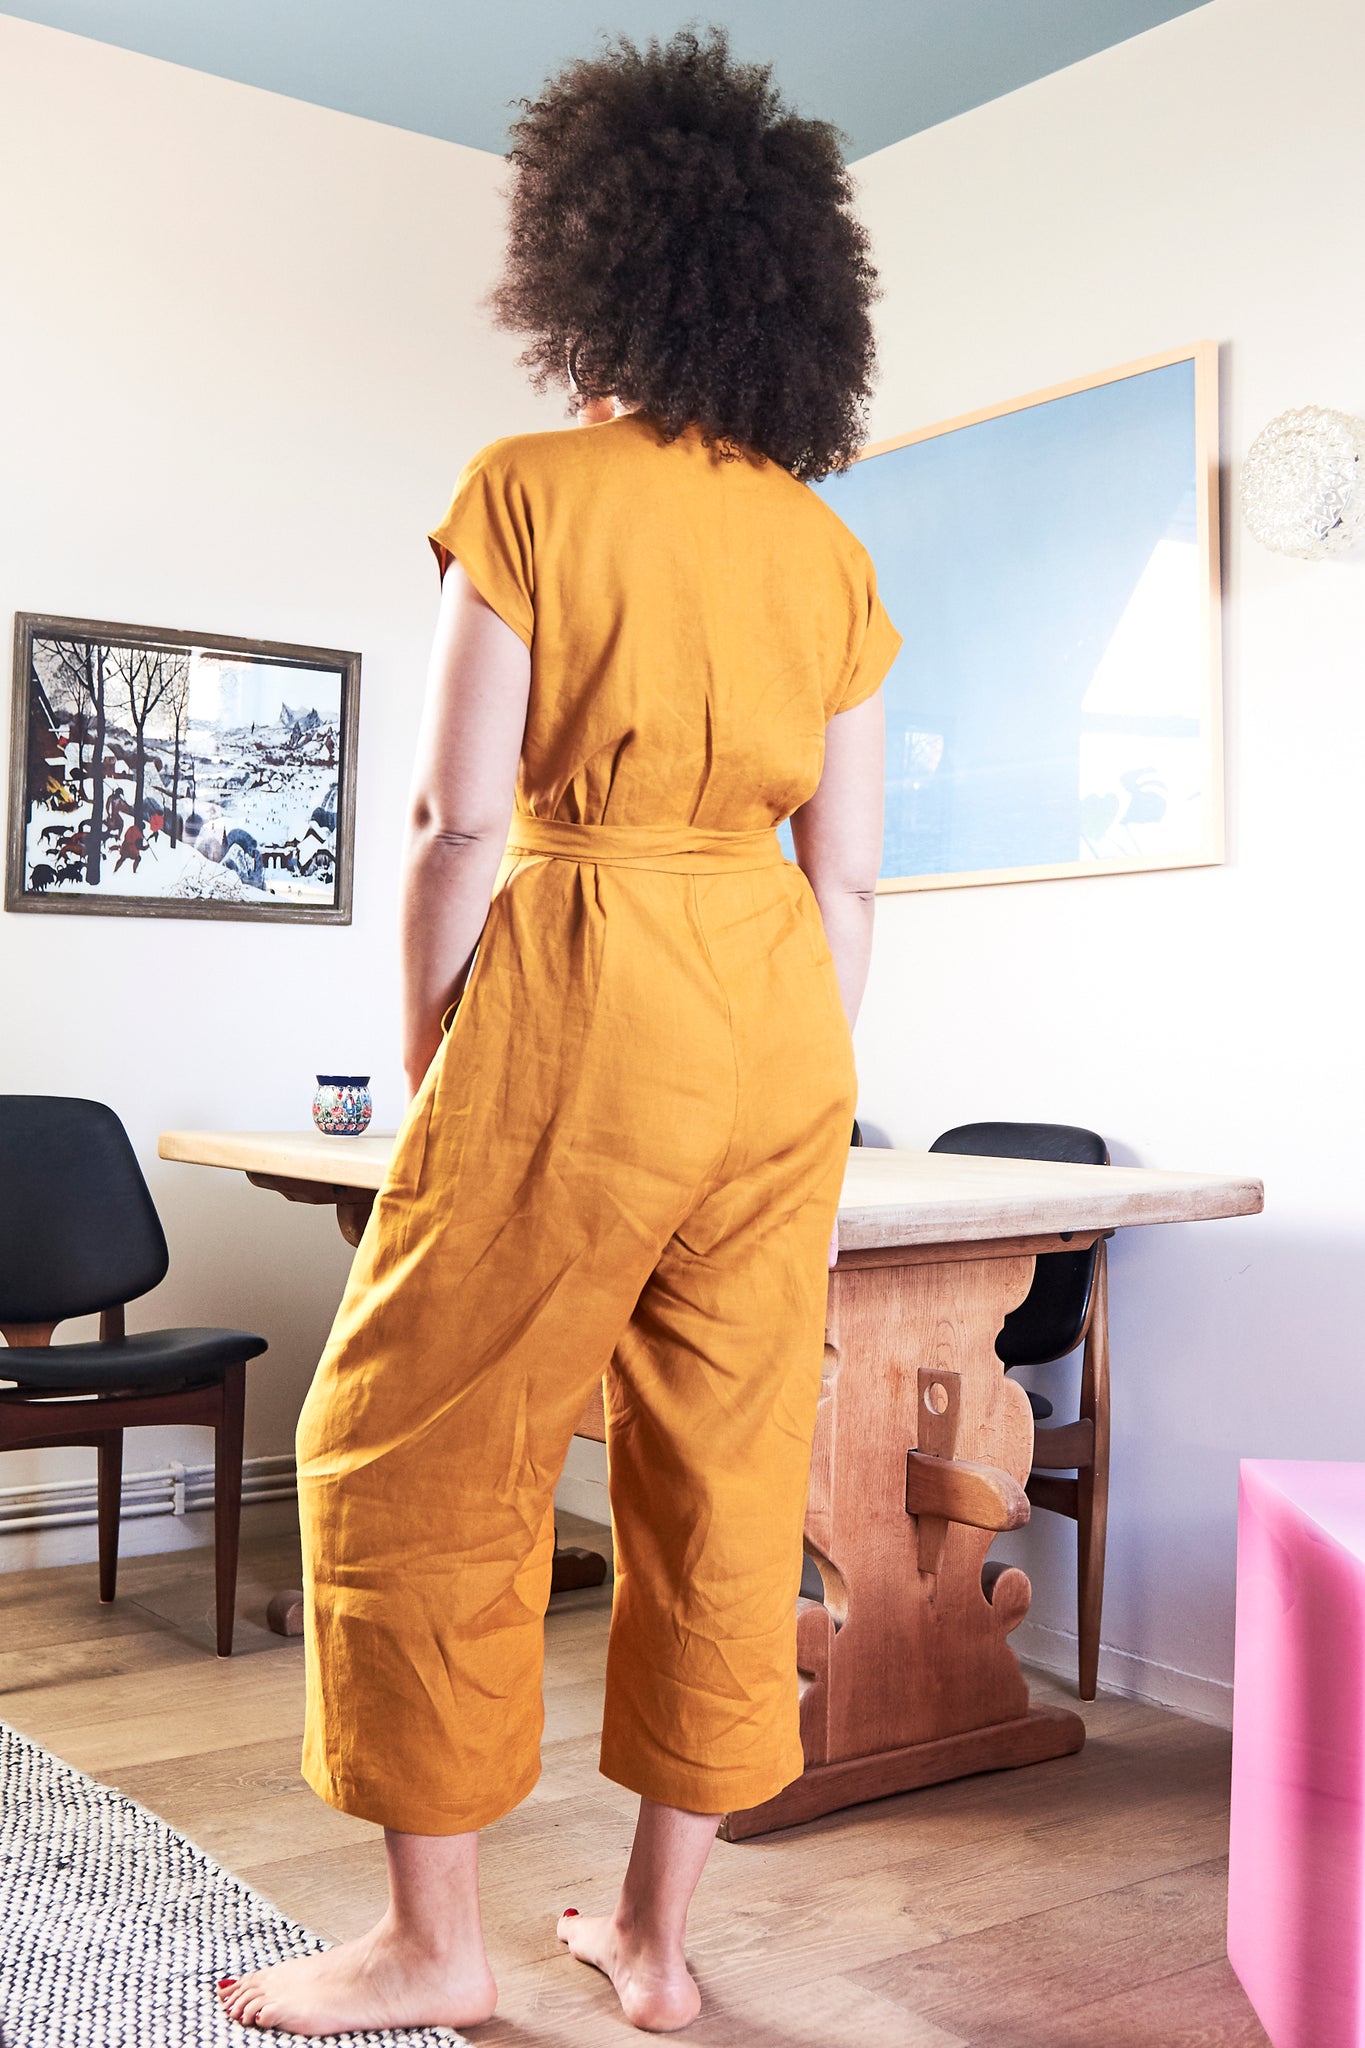 Sewing Patterns Archives - ChCh sews